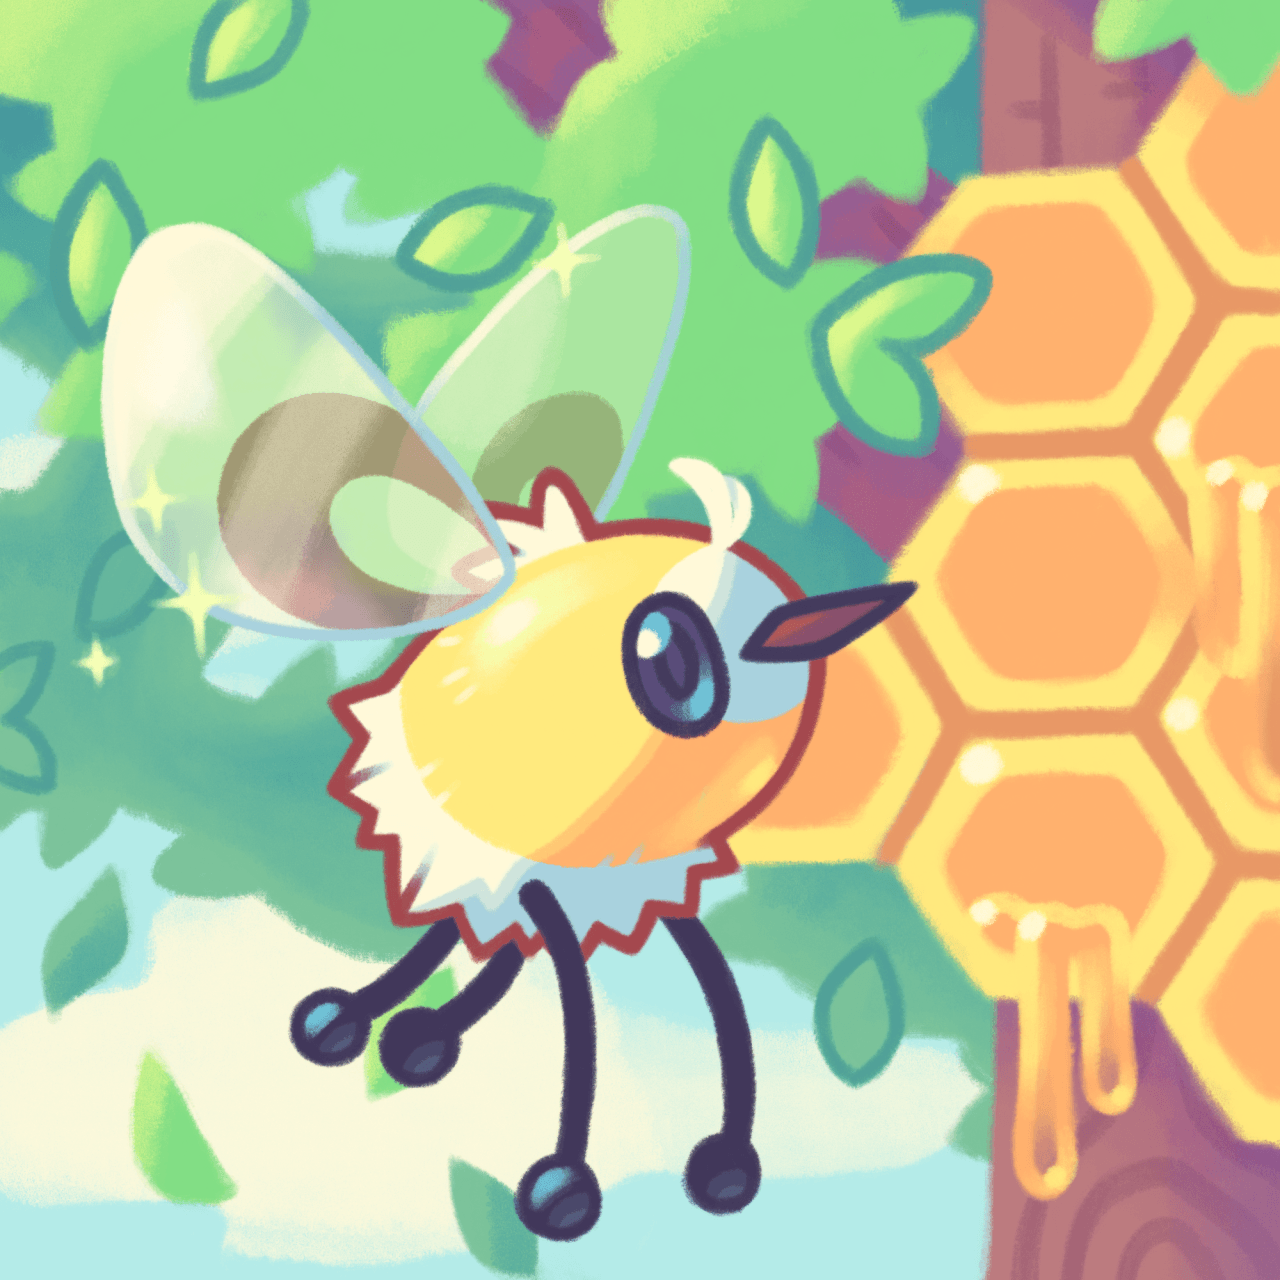 Cutiefly ” Reworked Cutiefly a bit and made a background to fit